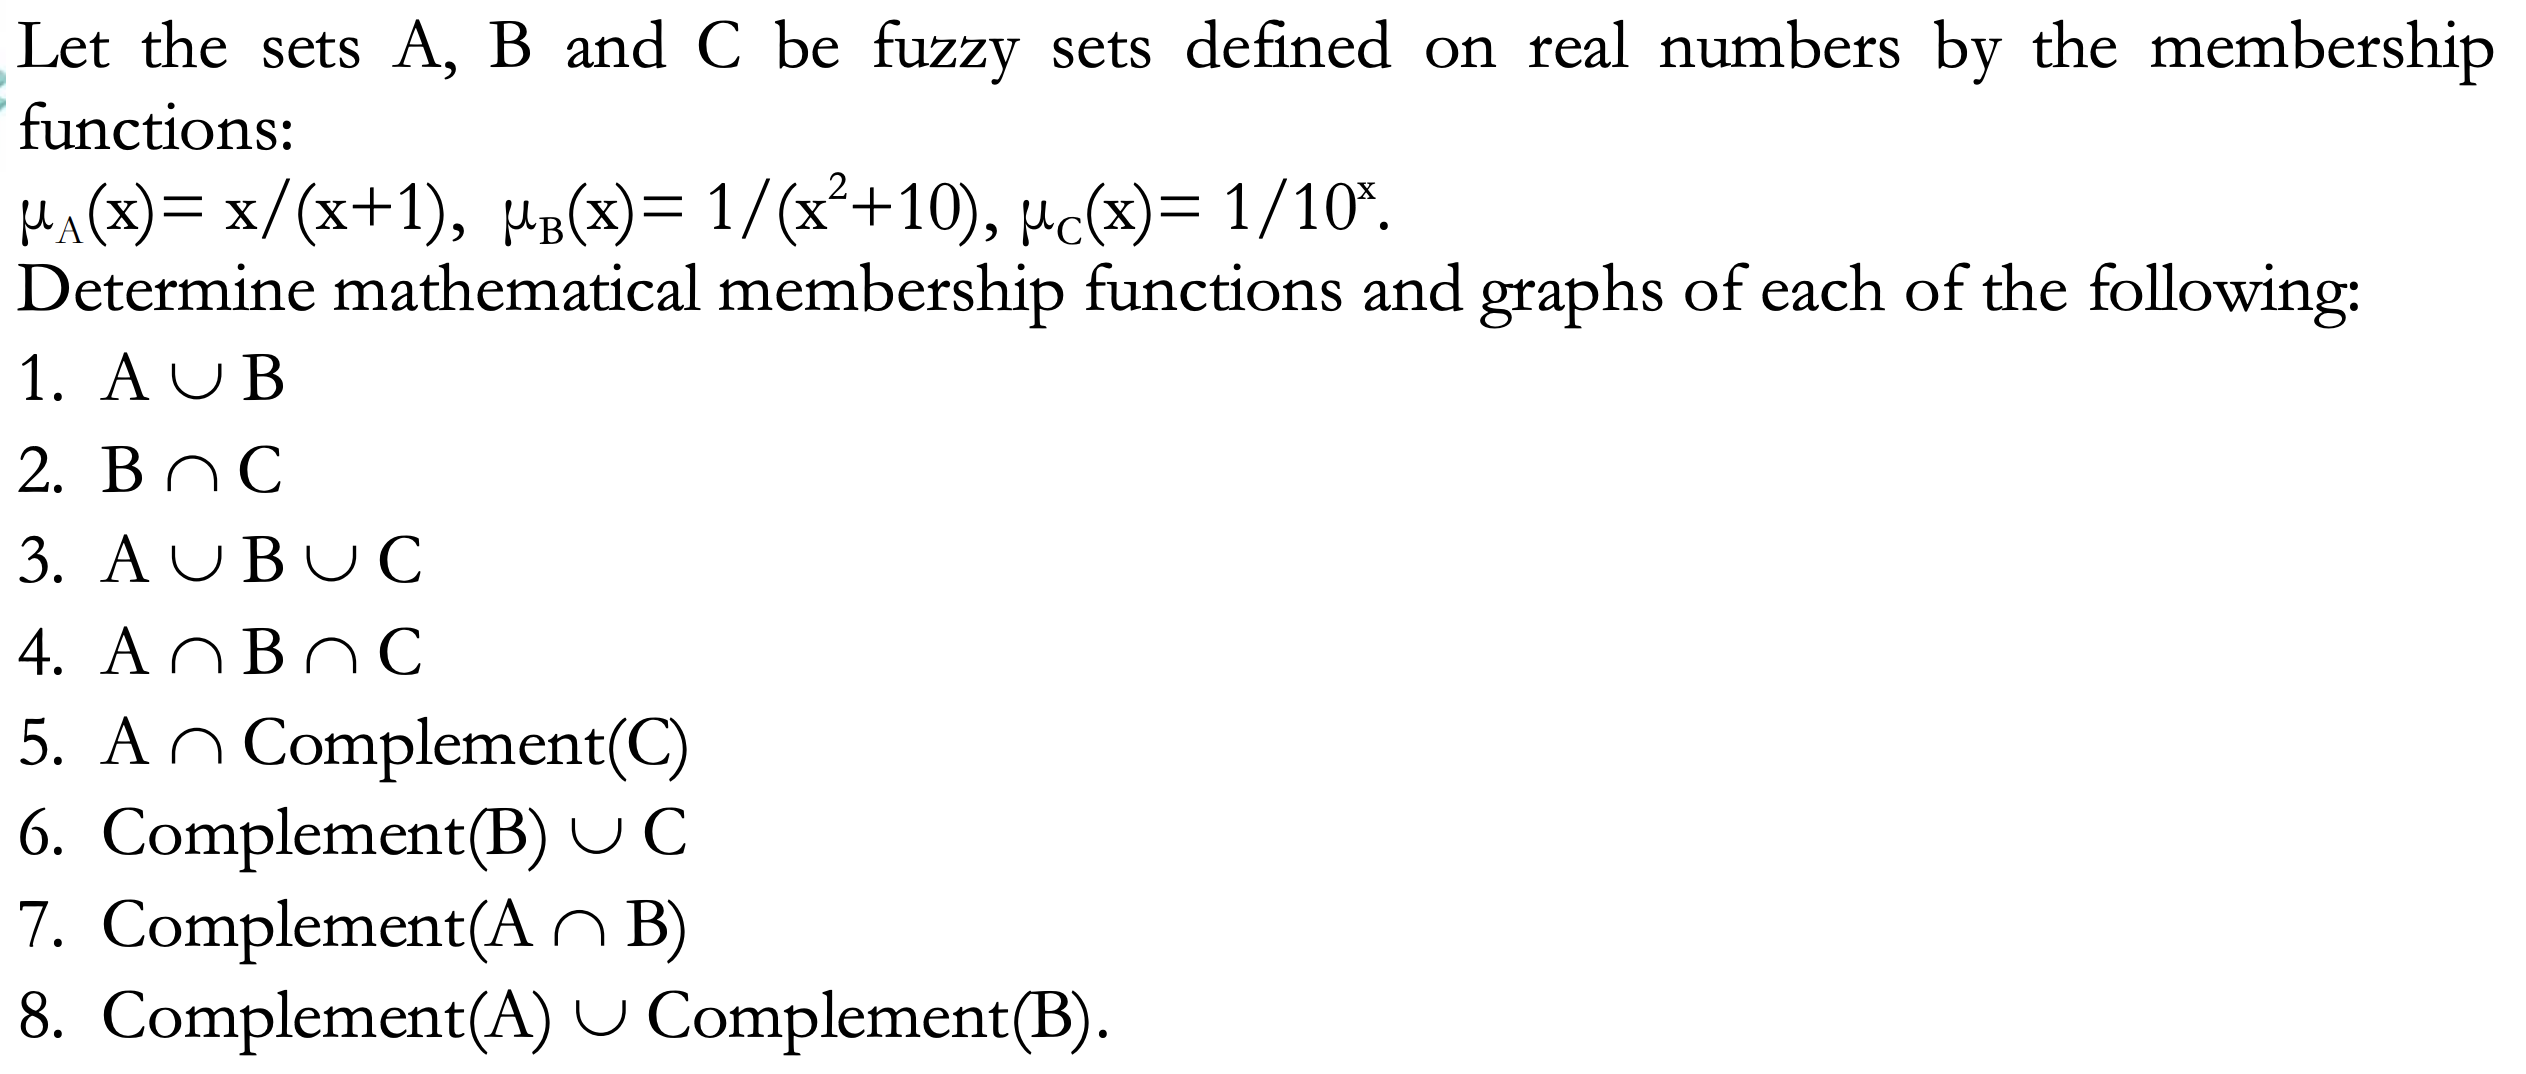 Let the sets A, B and C be fuzzy sets defined on real numbers by the membership
functions:
HA(x)= x/(x+1), Ha(x)= 1/(x²+10), µc(x)= 1/10*.
Determine mathematical membership functions and graphs of each of the following:
1. AUB
X'
2. BnC
3. AUBUC
4. ANBNC
5. An Complement(C)
6. Complement(B) U C
7. Complement(A O B)
8. Complement(A) U Complement(B).
